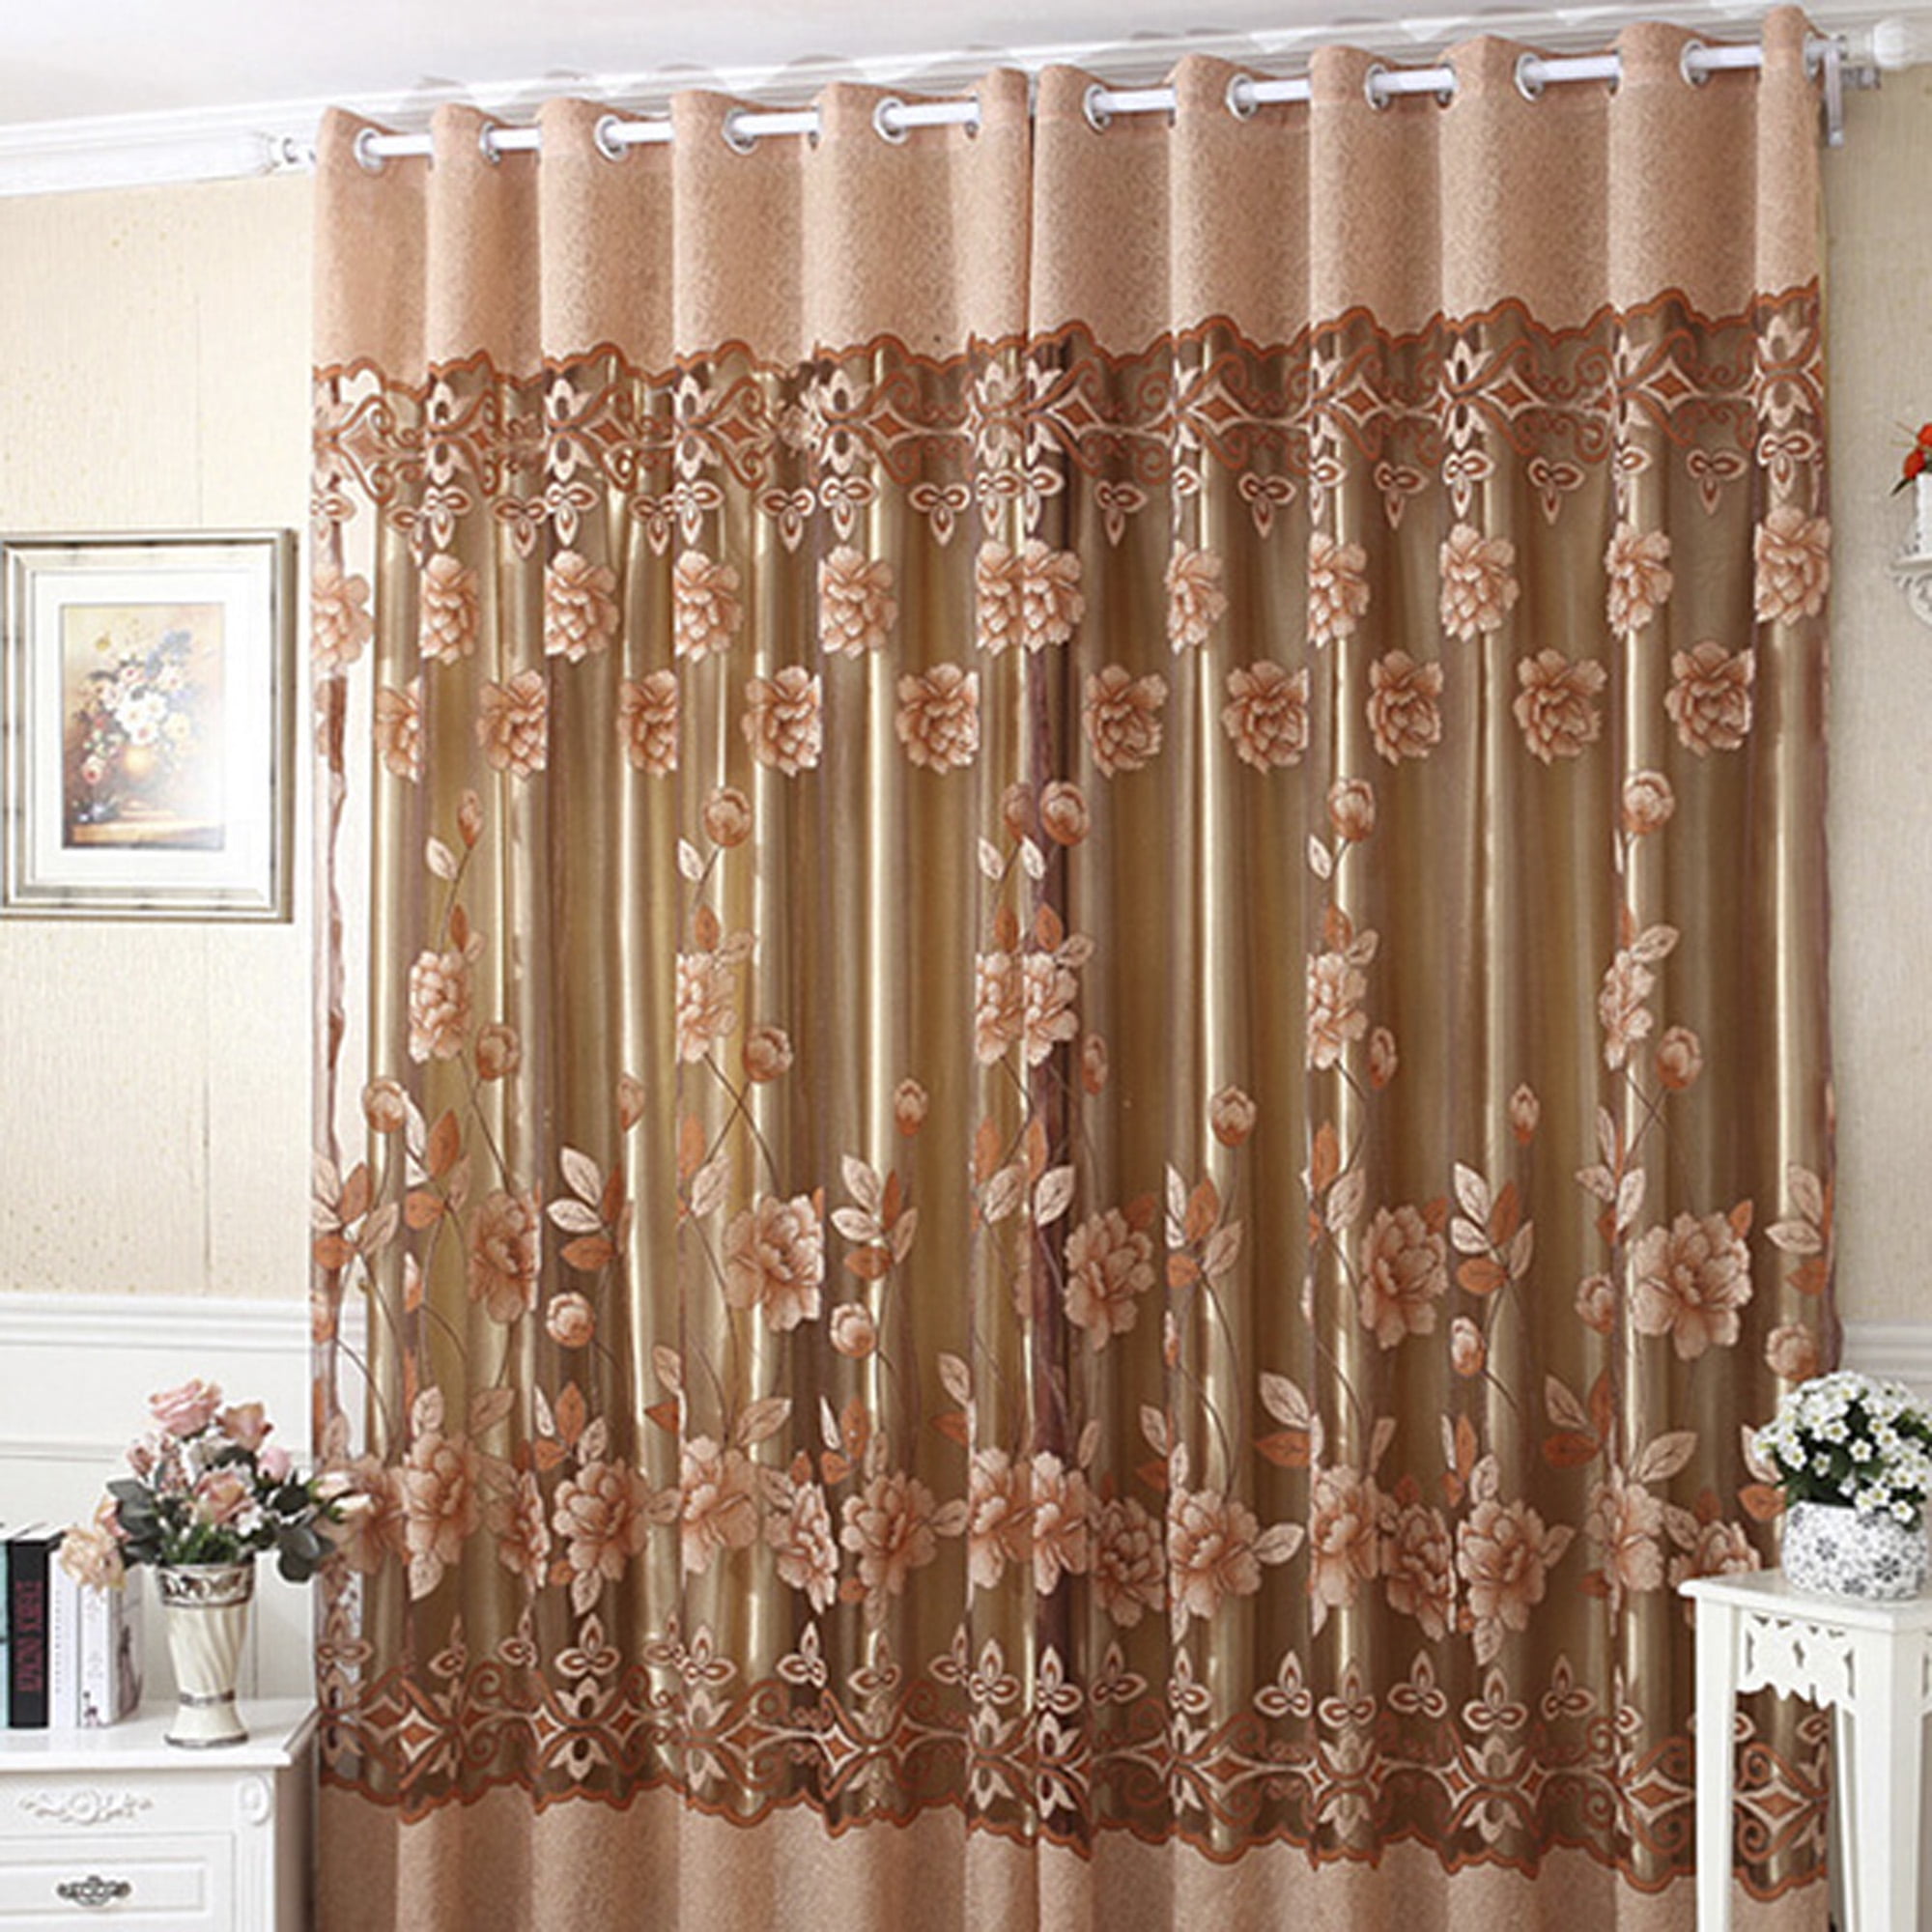 Floral Tulle Voile Door Window Curtain Drape Panel Sheer Scarf Valances Divider 